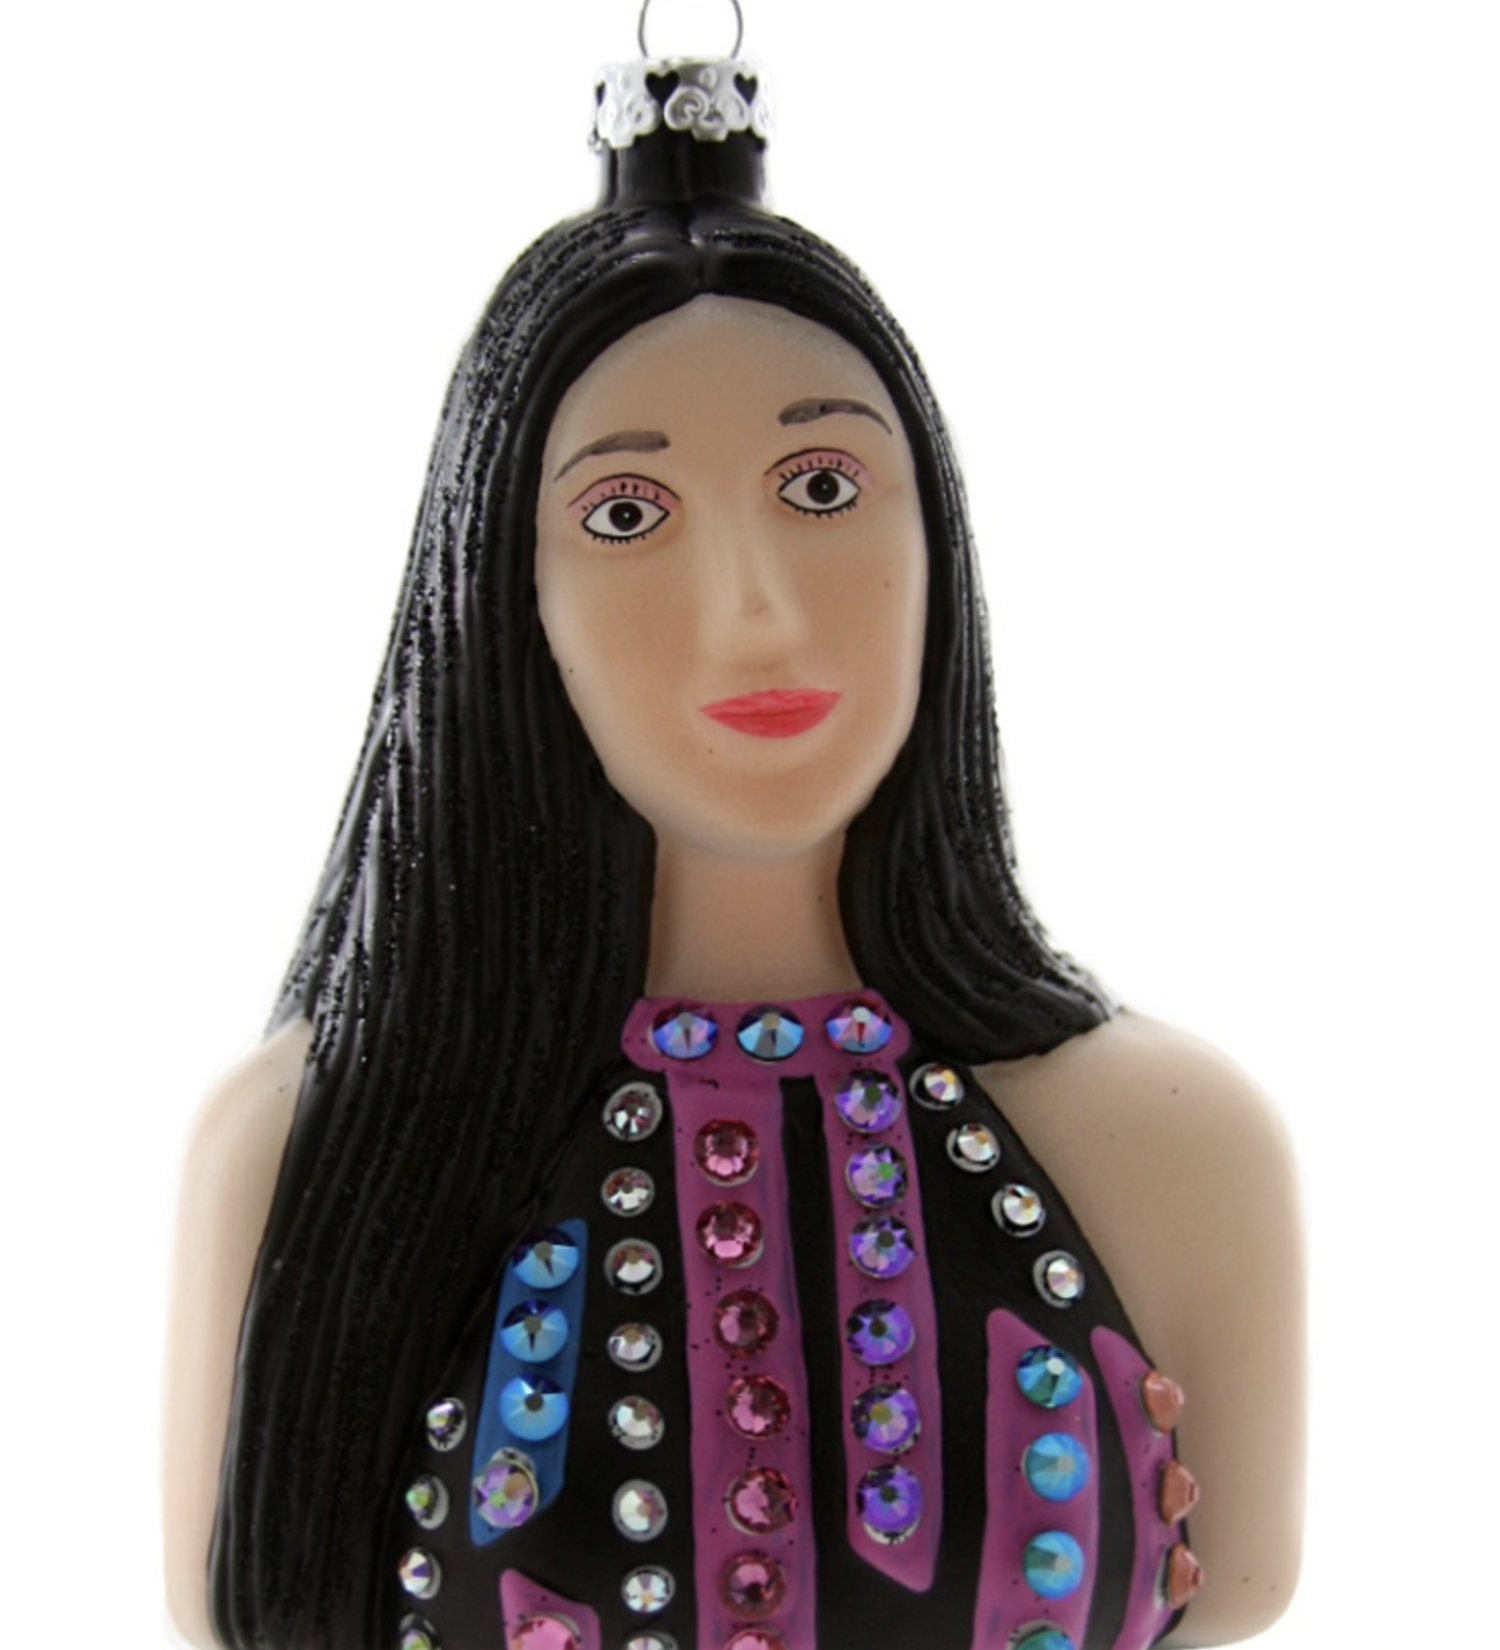 This Cher ornament is ideal for any tree